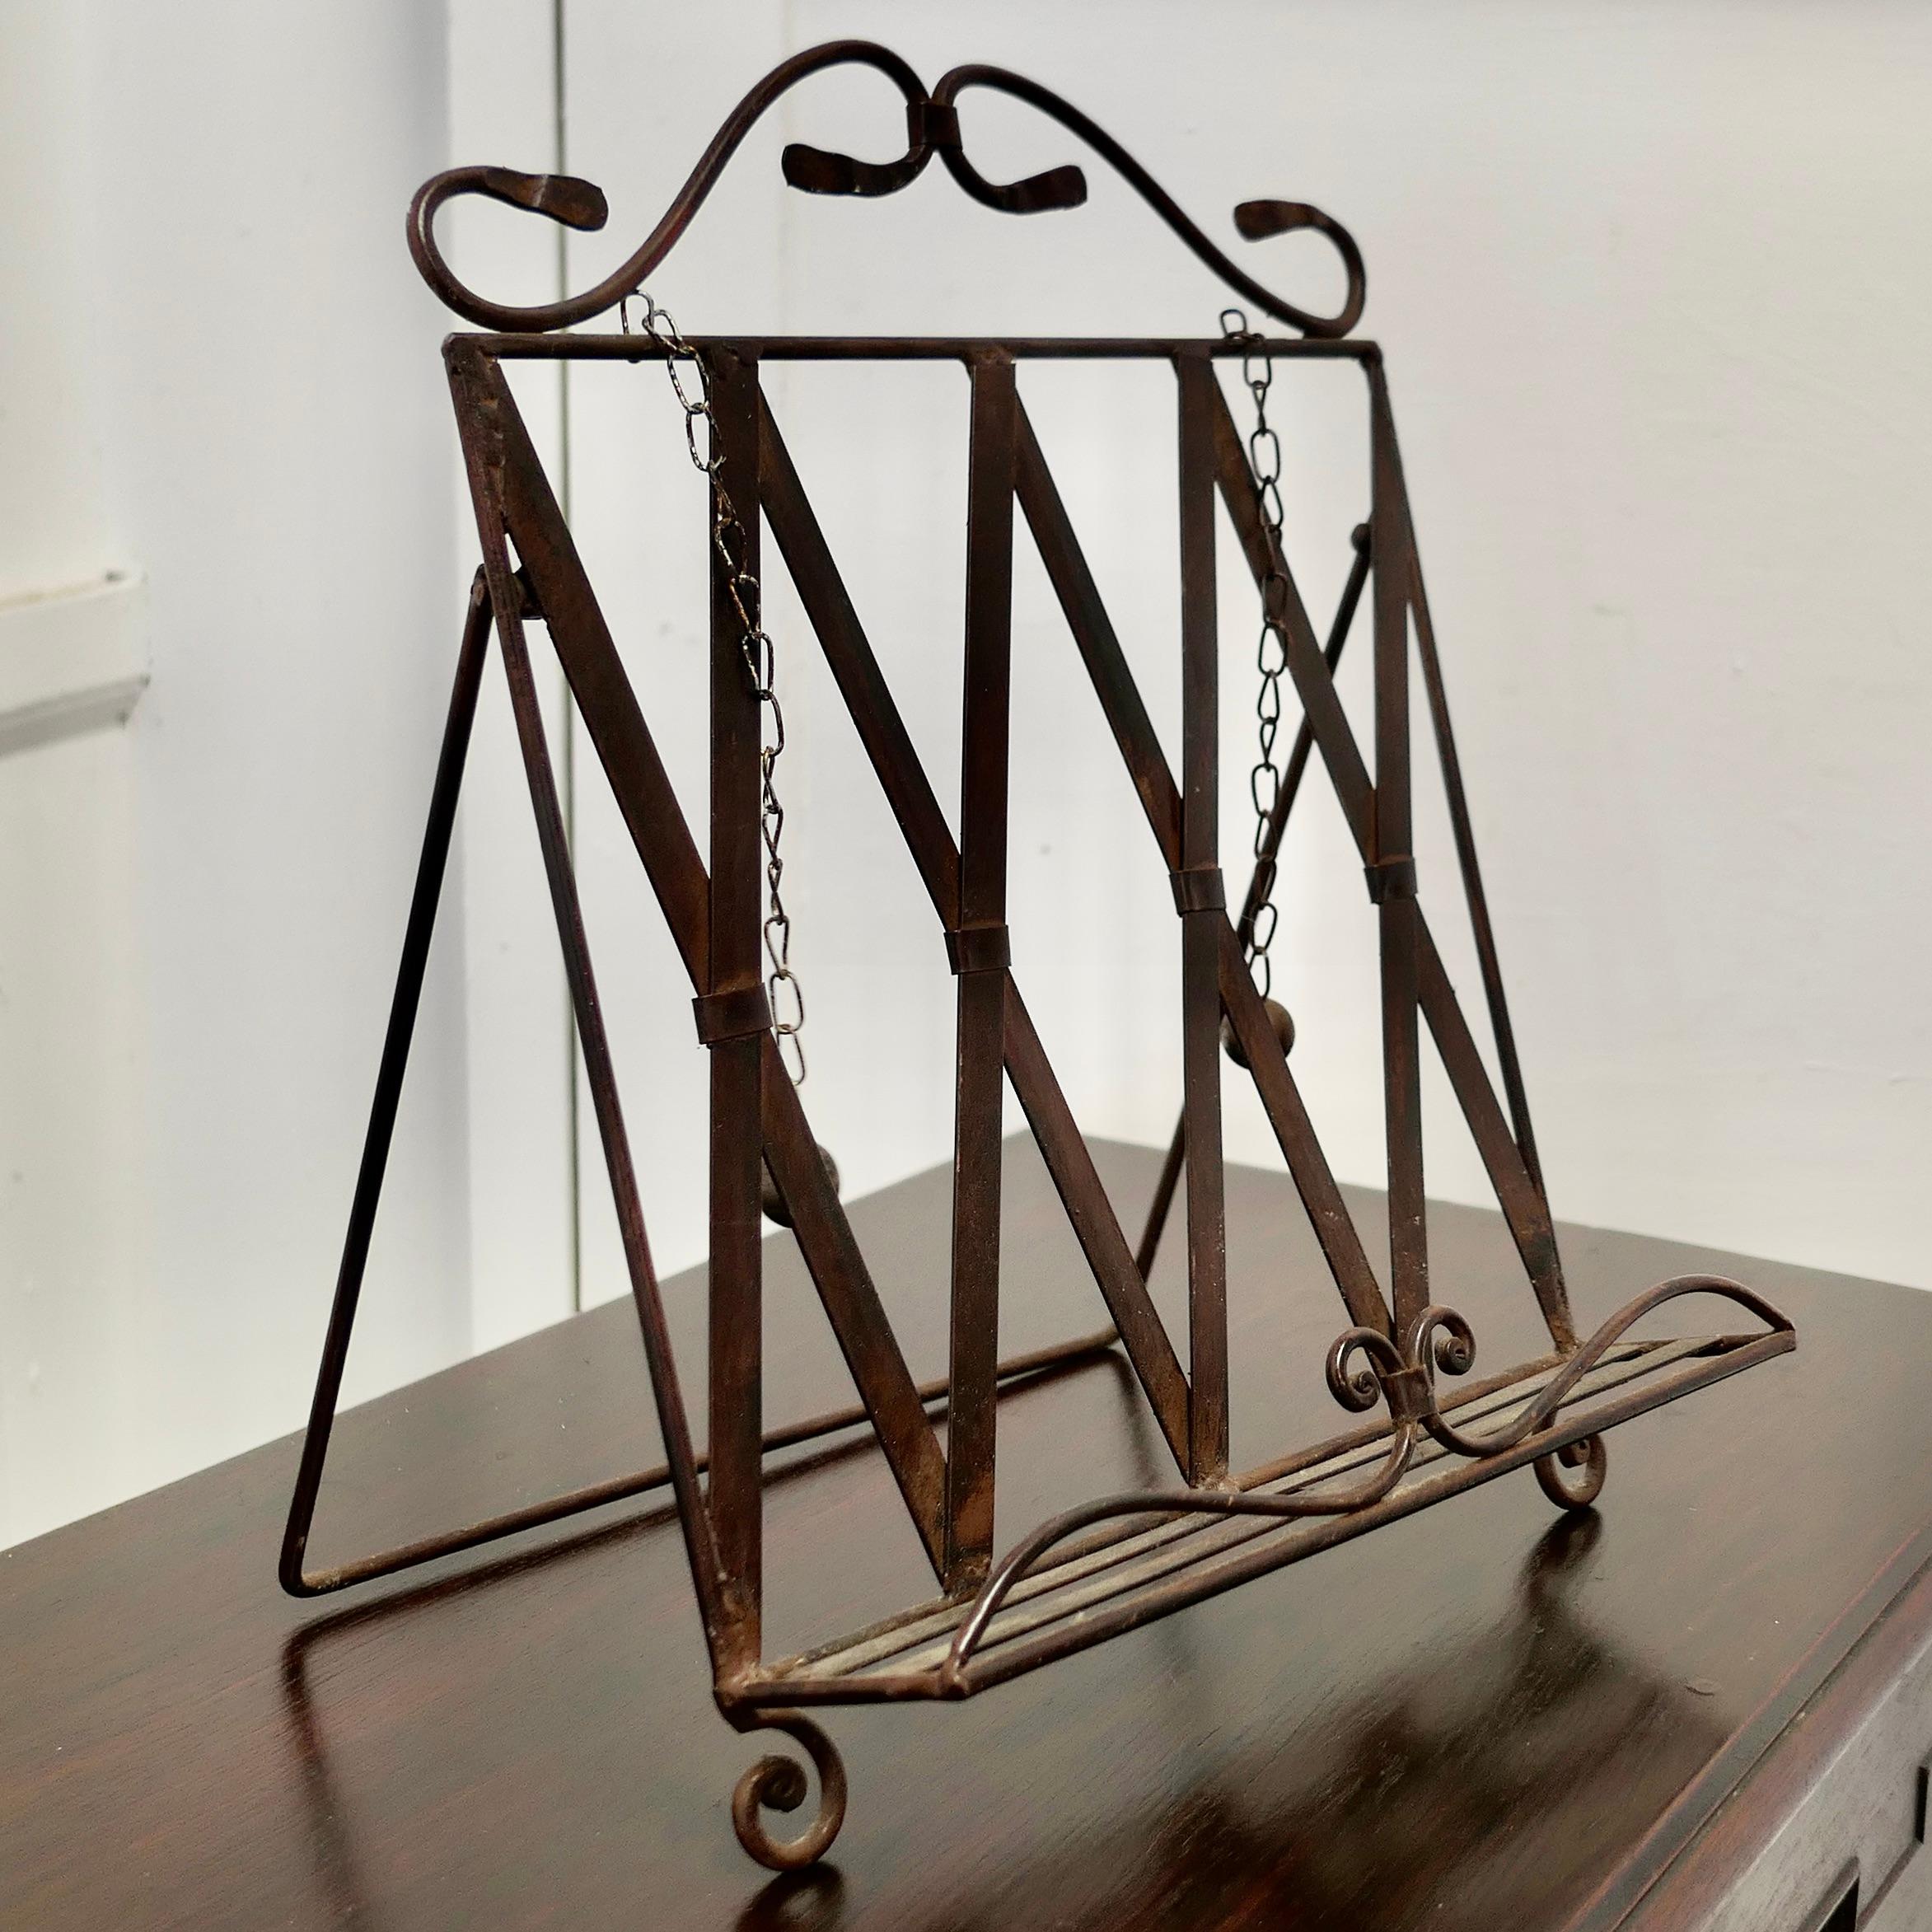 Wrought Iron Folding Book Rest, with Page Weights

This is a charming piece, it is made in Wrought Iron the stand has an angle setting and a front rail to keep the page open, 2 ball weights hang from chains to keep the book open 

A charming piece